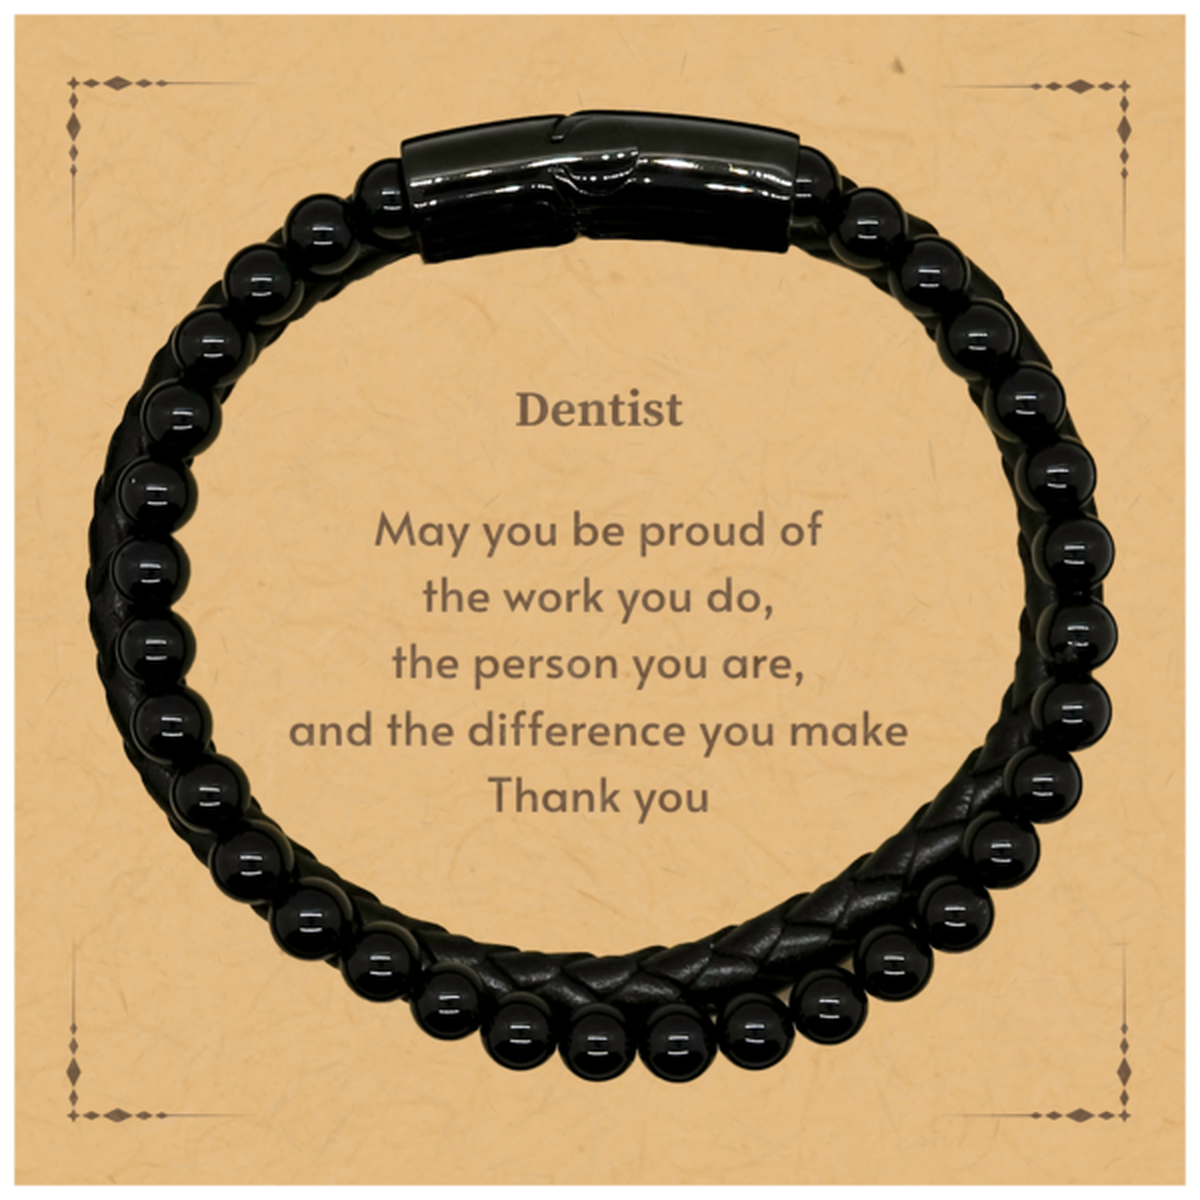 Heartwarming Stone Leather Bracelets Retirement Coworkers Gifts for Dentist, Dentist May You be proud of the work you do, the person you are Gifts for Boss Men Women Friends